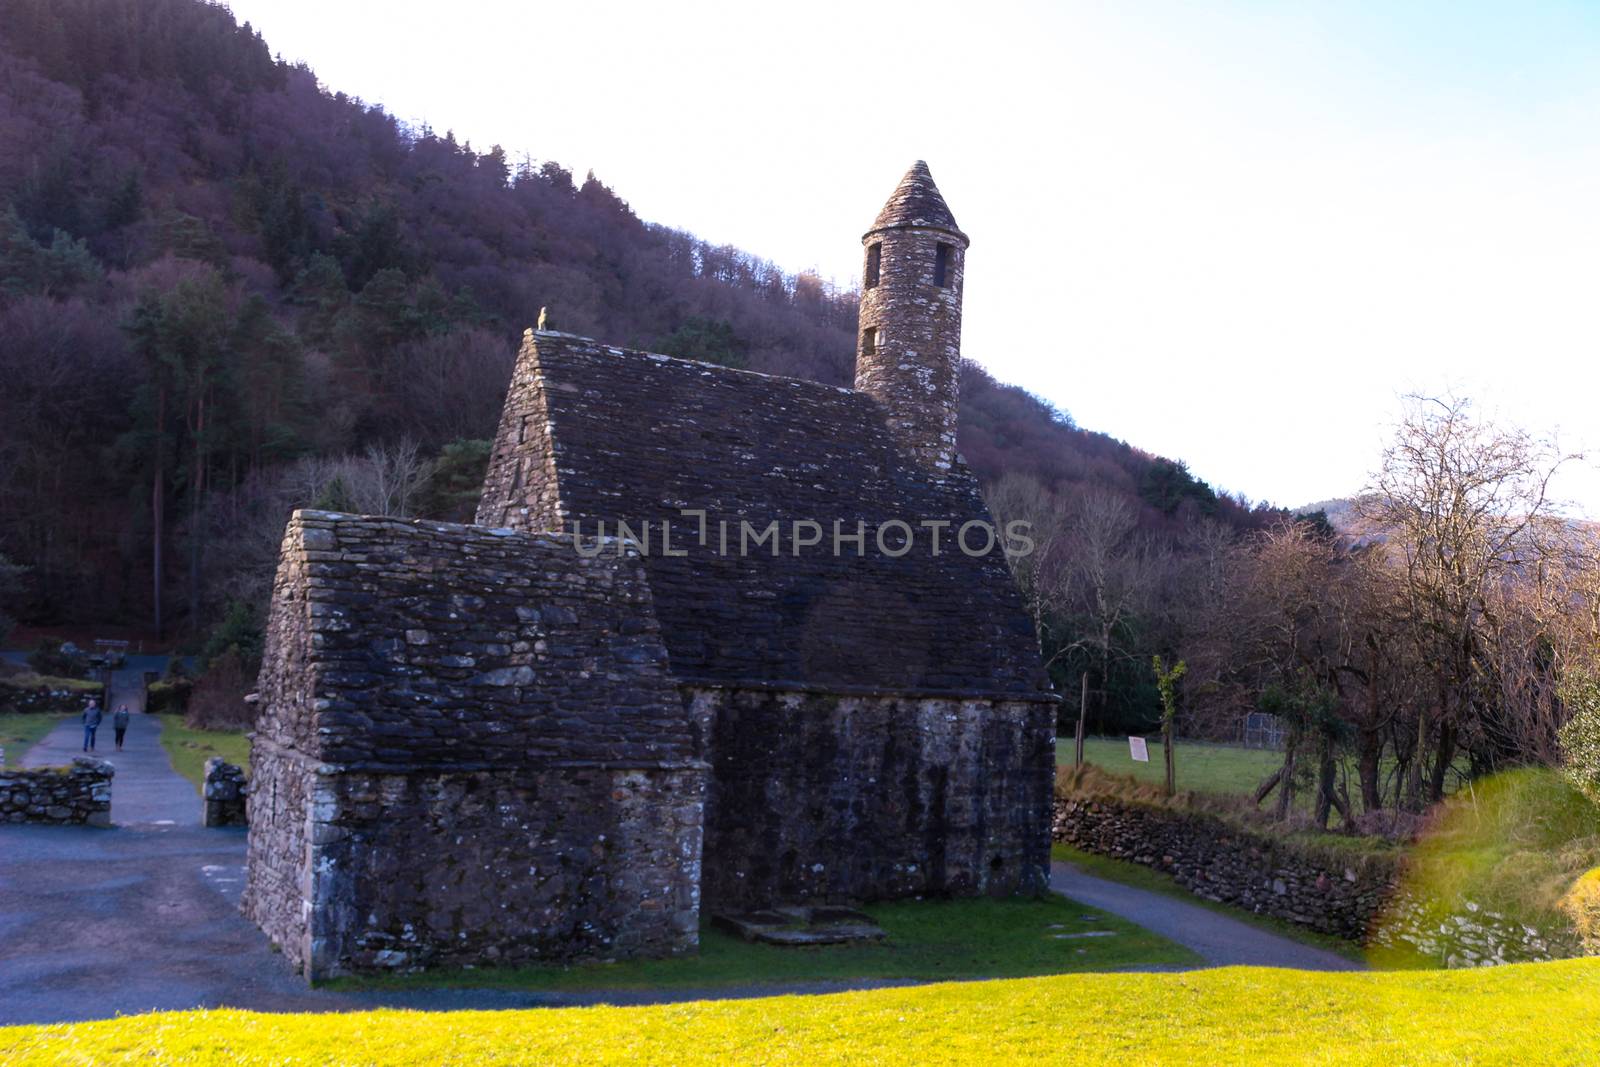  A small ruin house in the Glendalough valley in Wicklow mountains. Historic European site. by mynewturtle1